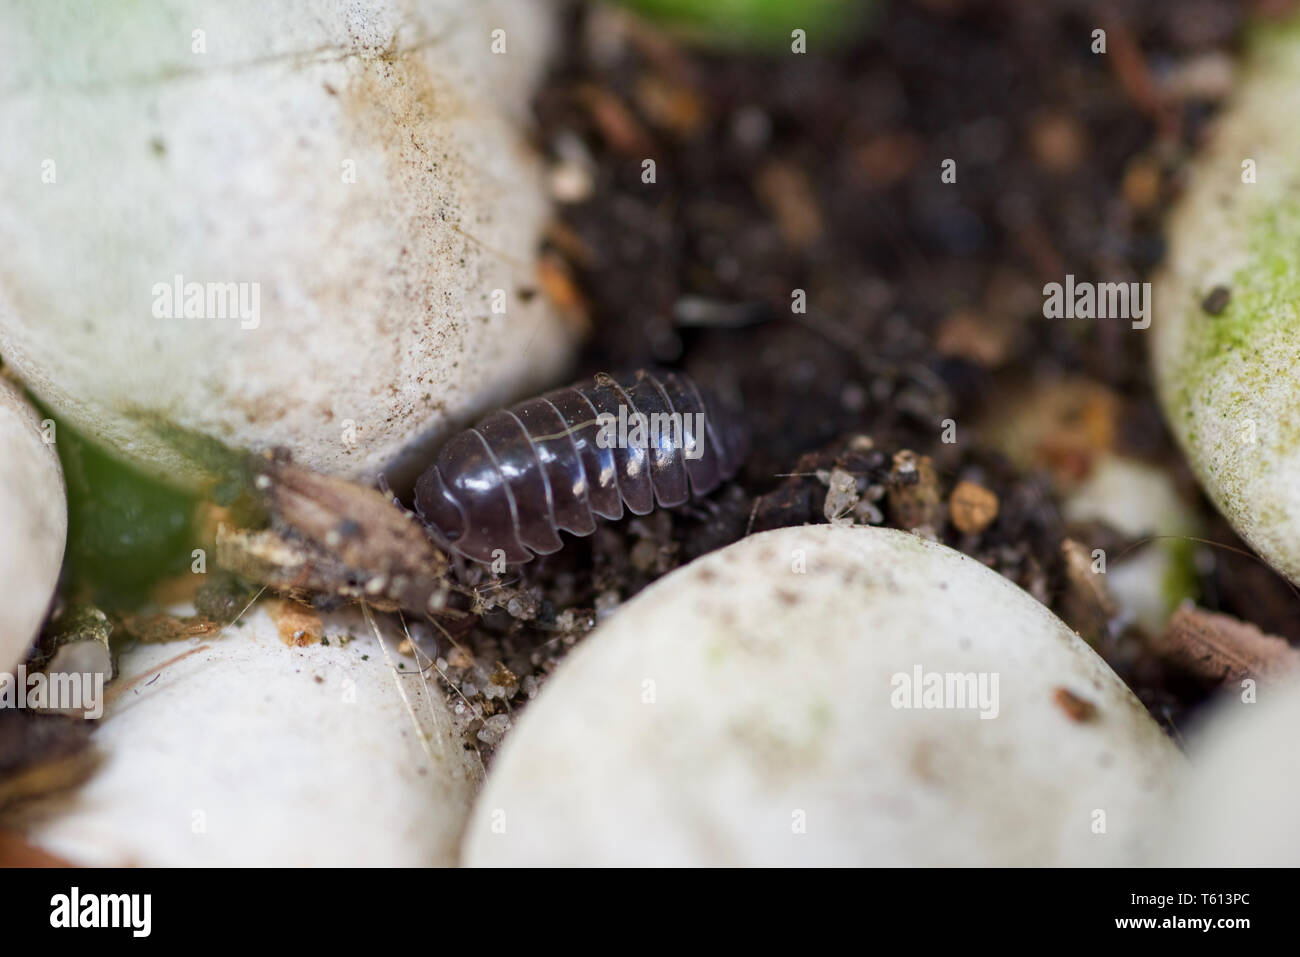 Woodlouse crawling in the garden Stock Photo